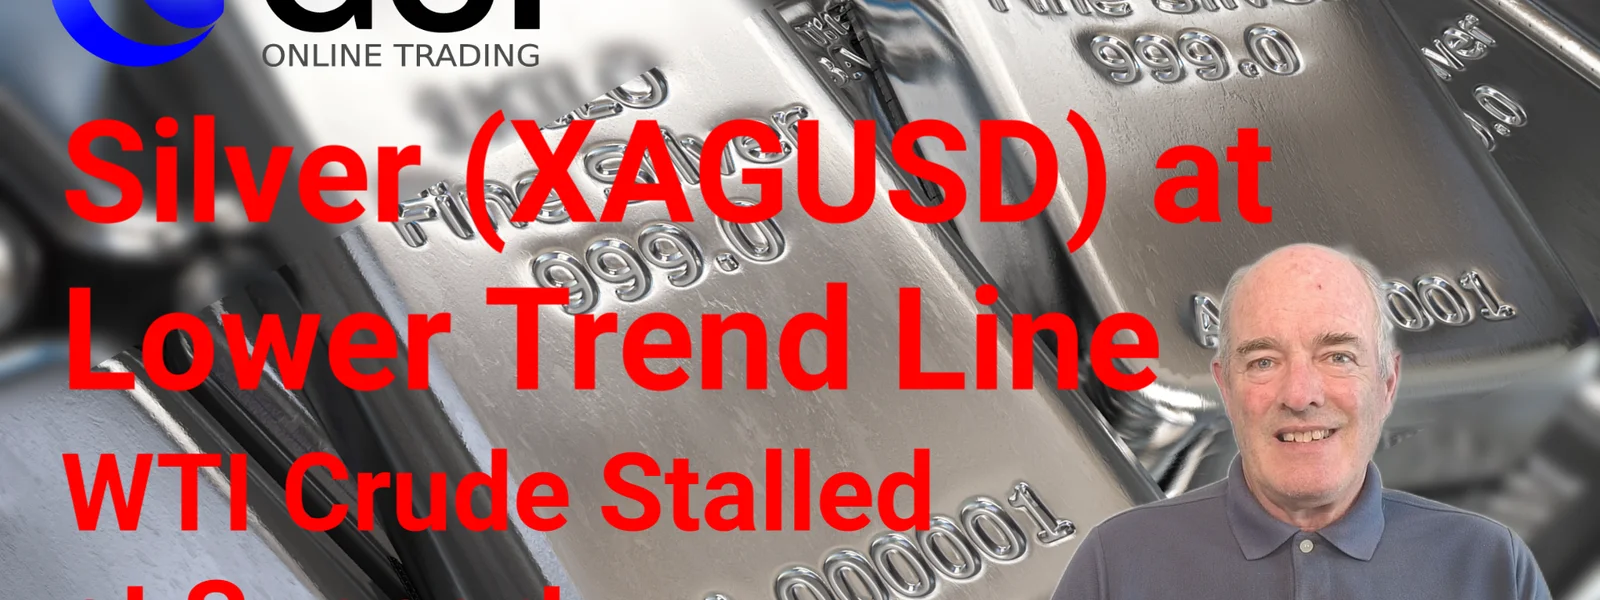 Forex Trading Silver (XAGUSD) at Lower Trend Line.  WTI Stalled at Support. NASDAQ Higher but Dow Jones Lower.